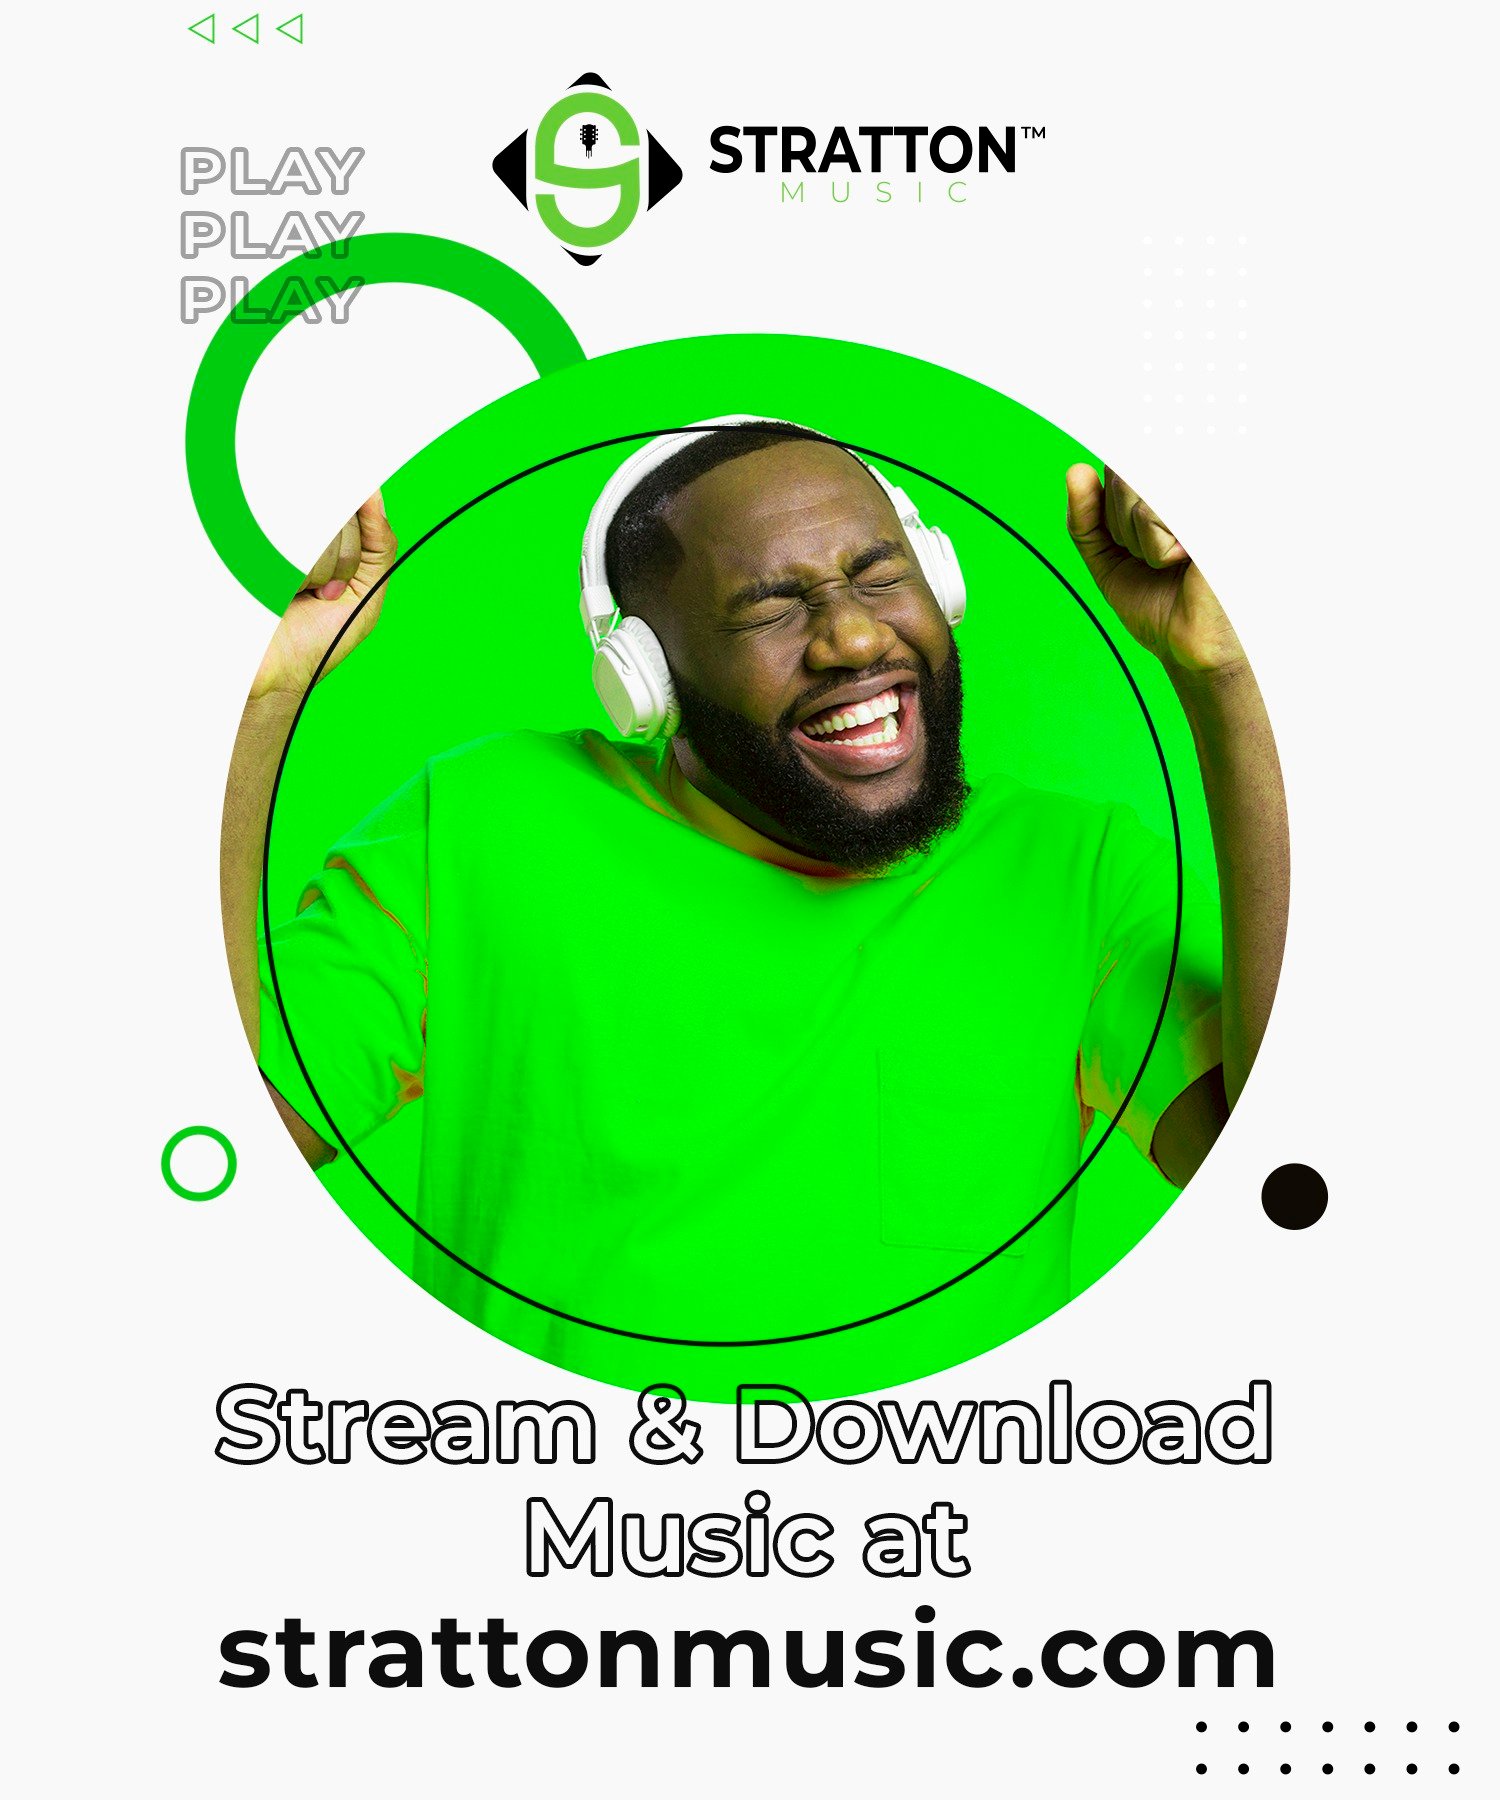 stratton music stream and download cover image